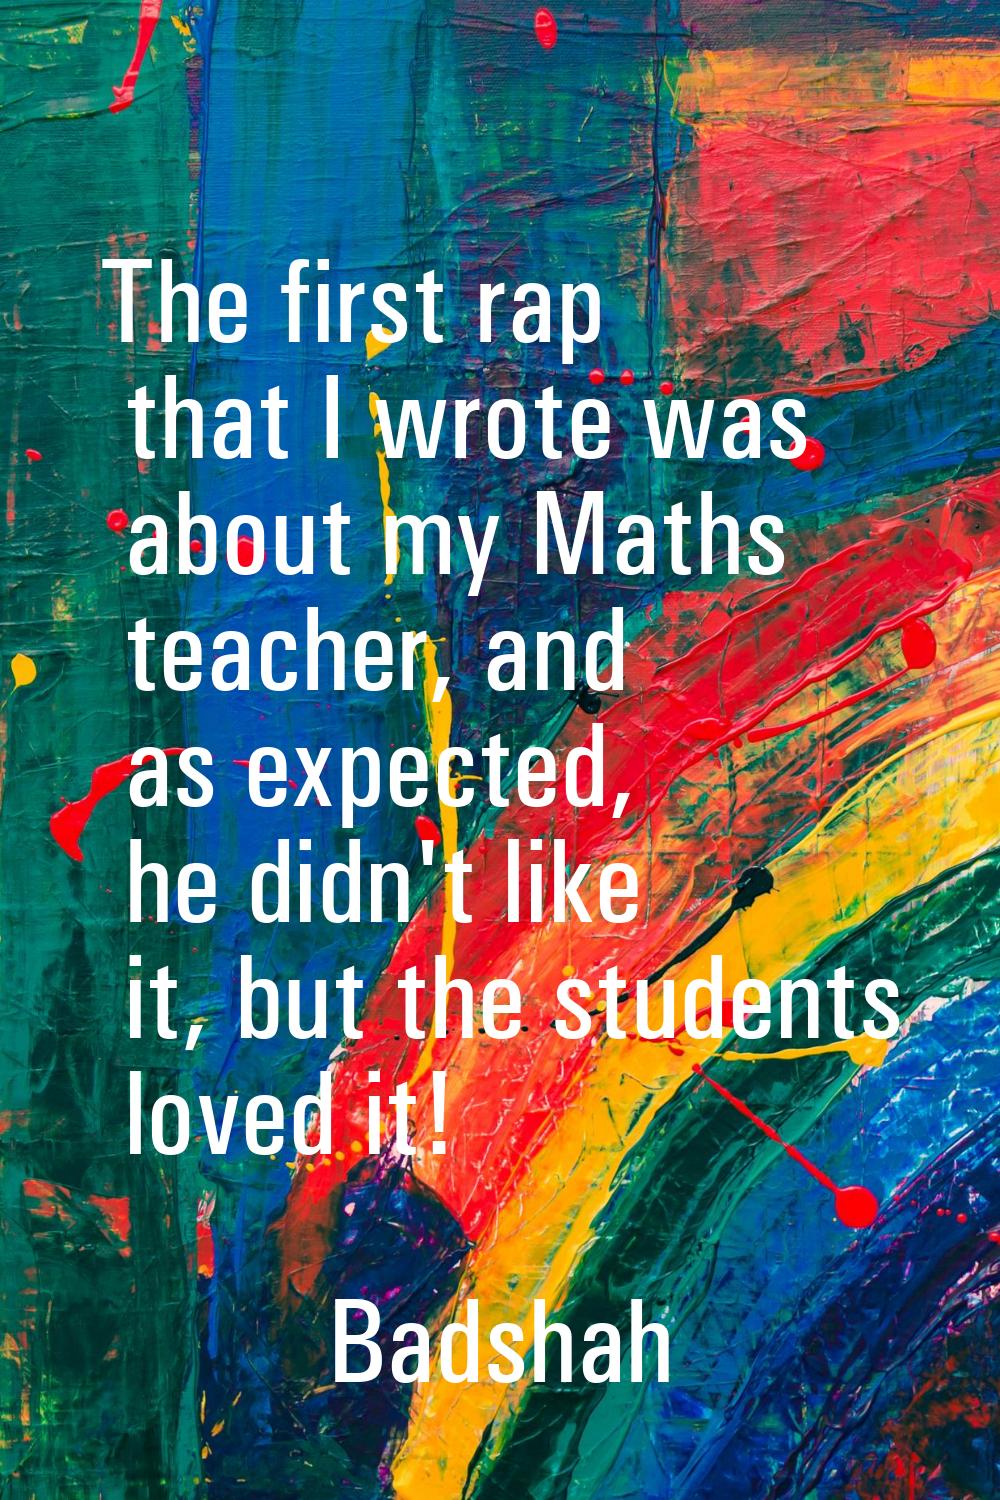 The first rap that I wrote was about my Maths teacher, and as expected, he didn't like it, but the 